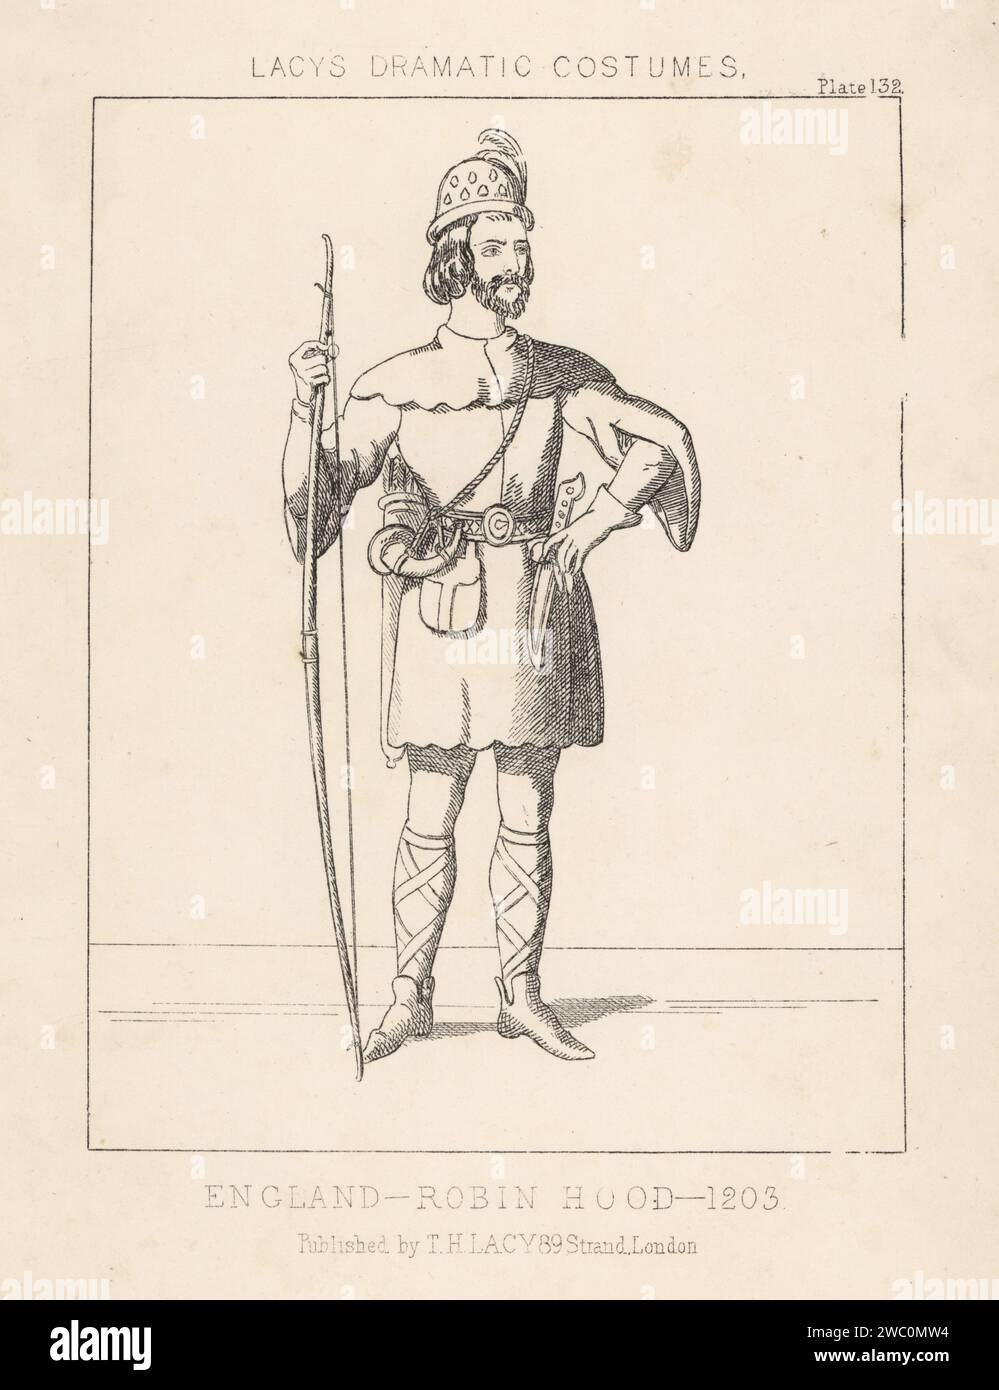 Robin Hood, legendary heroic outlaw, England, 1203. In plumed cap, tunic with collar and hanging sleeves, armed with dagger, bow, quiver of arrows and hunting horn. Lithograph from Thomas Hailes Lacy's Male Costumes, Historical, National and Dramatic in 200 Plates, London, 1865. Lacy (1809-1873) was a British actor, playwright, theatrical manager and publisher. Stock Photo